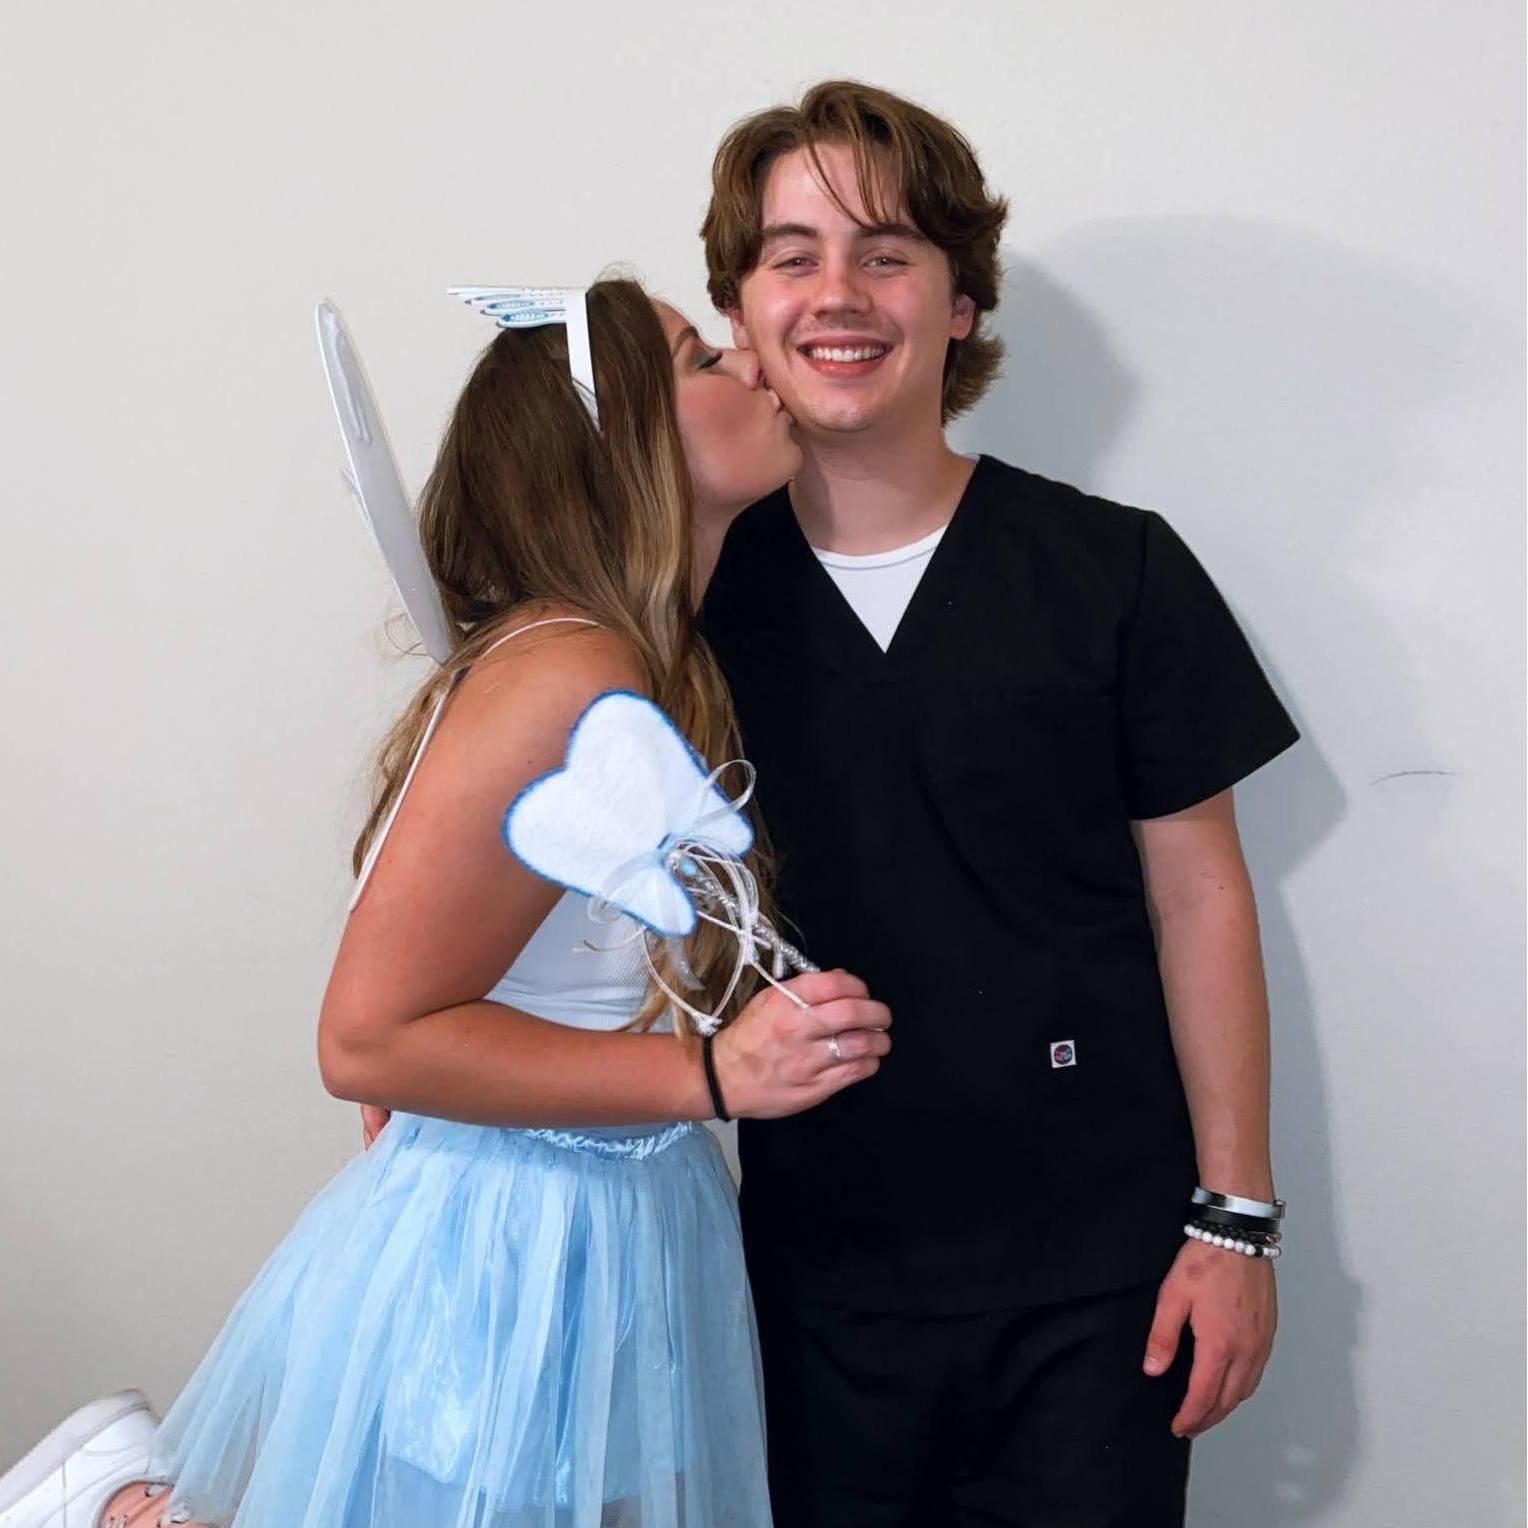 The tooth fairy and her dentist for Halloween